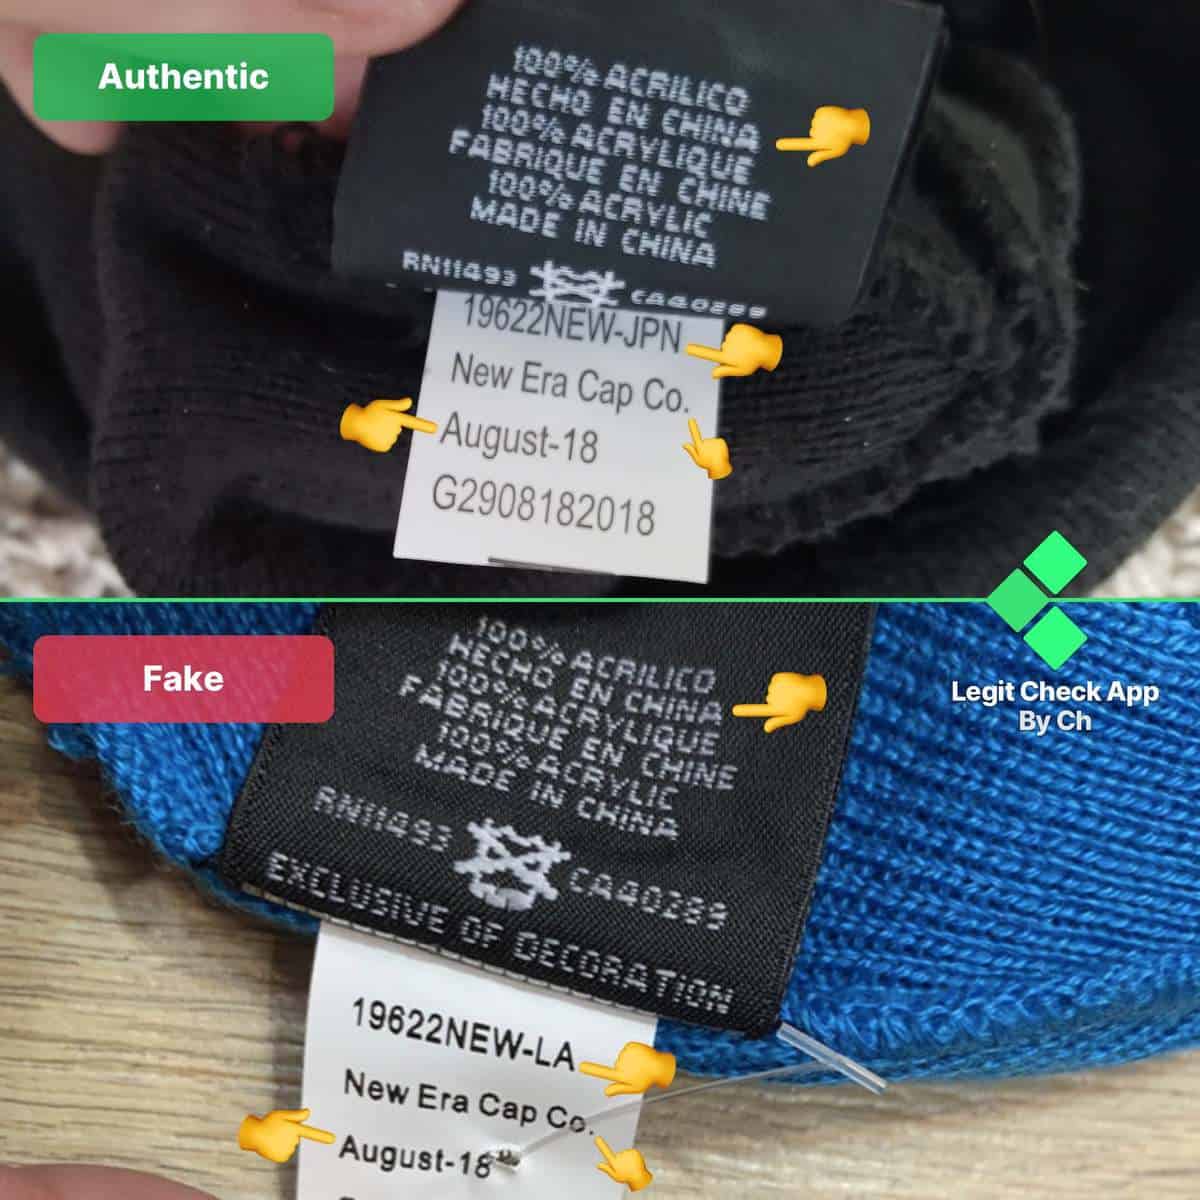 HOW TO TELL REAL VS FAKE SUPREME HAT EDITION 